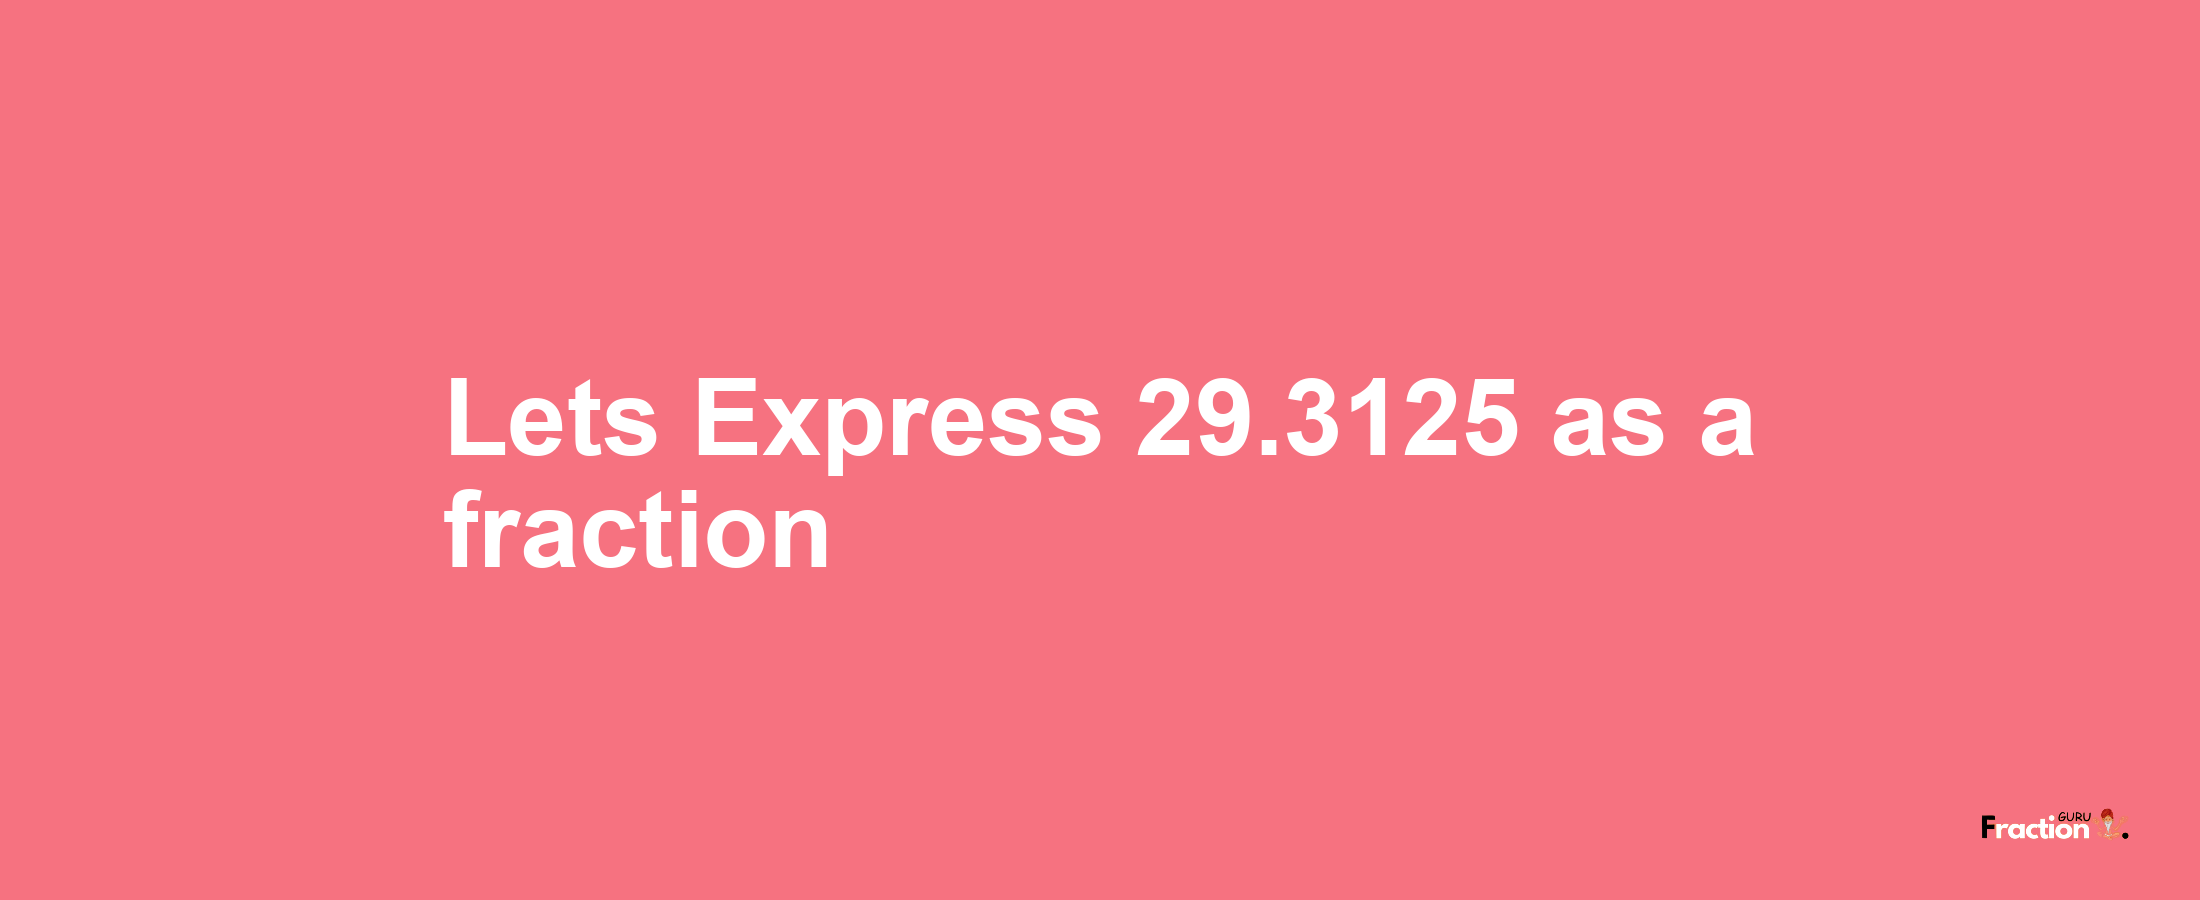 Lets Express 29.3125 as afraction